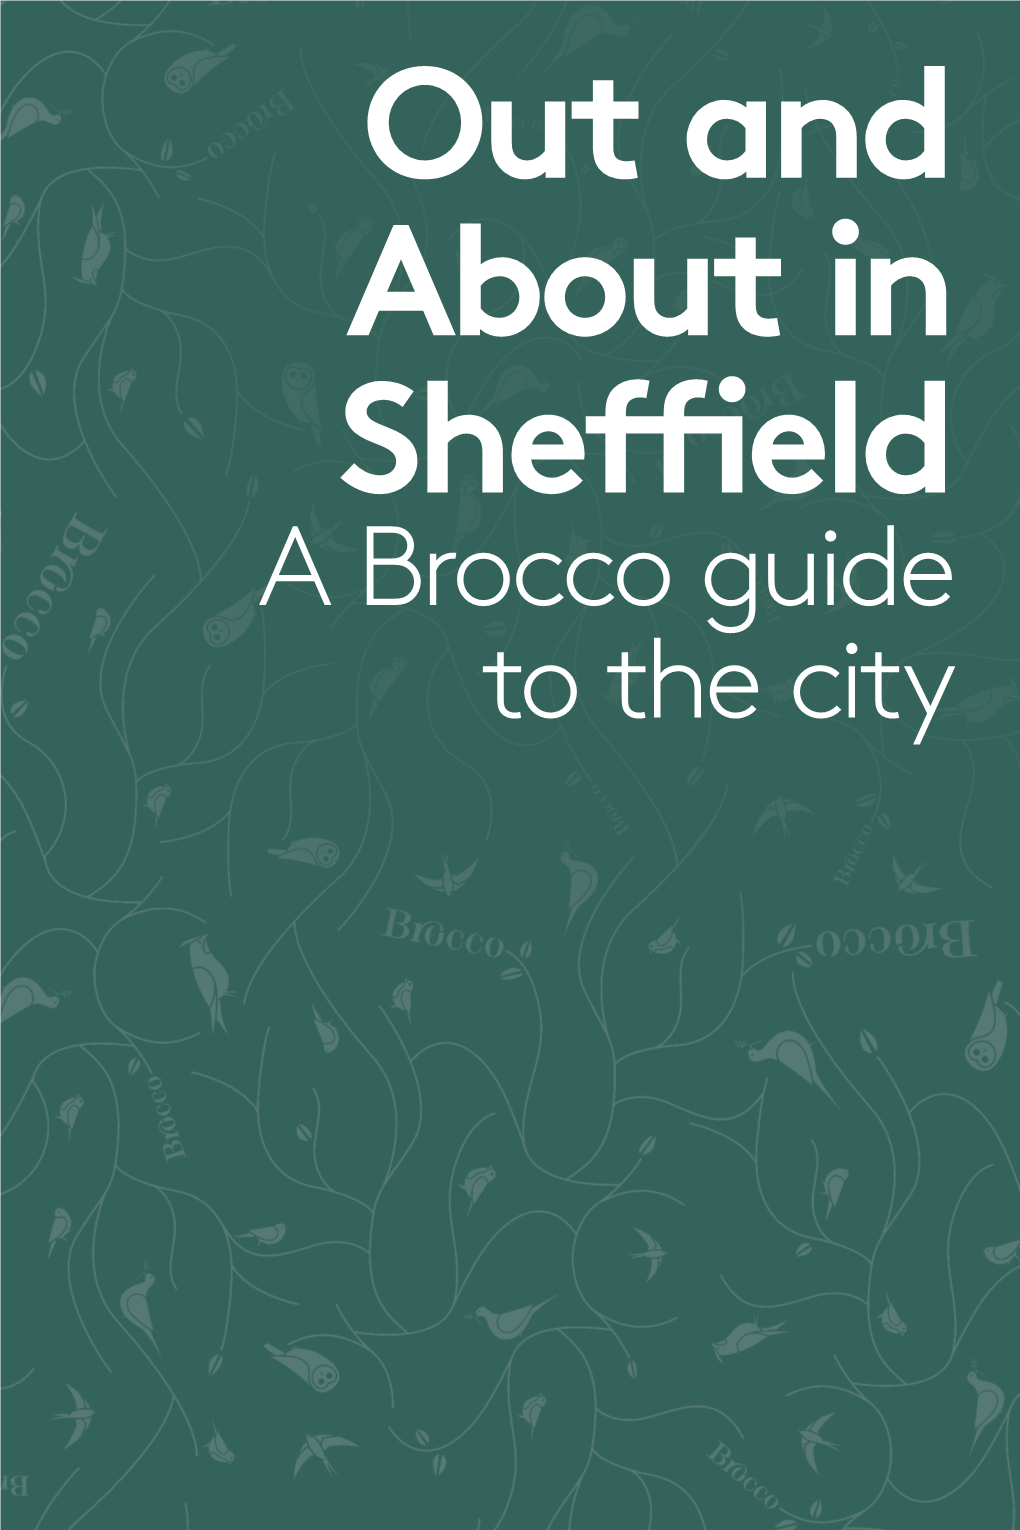 A Brocco Guide to the City